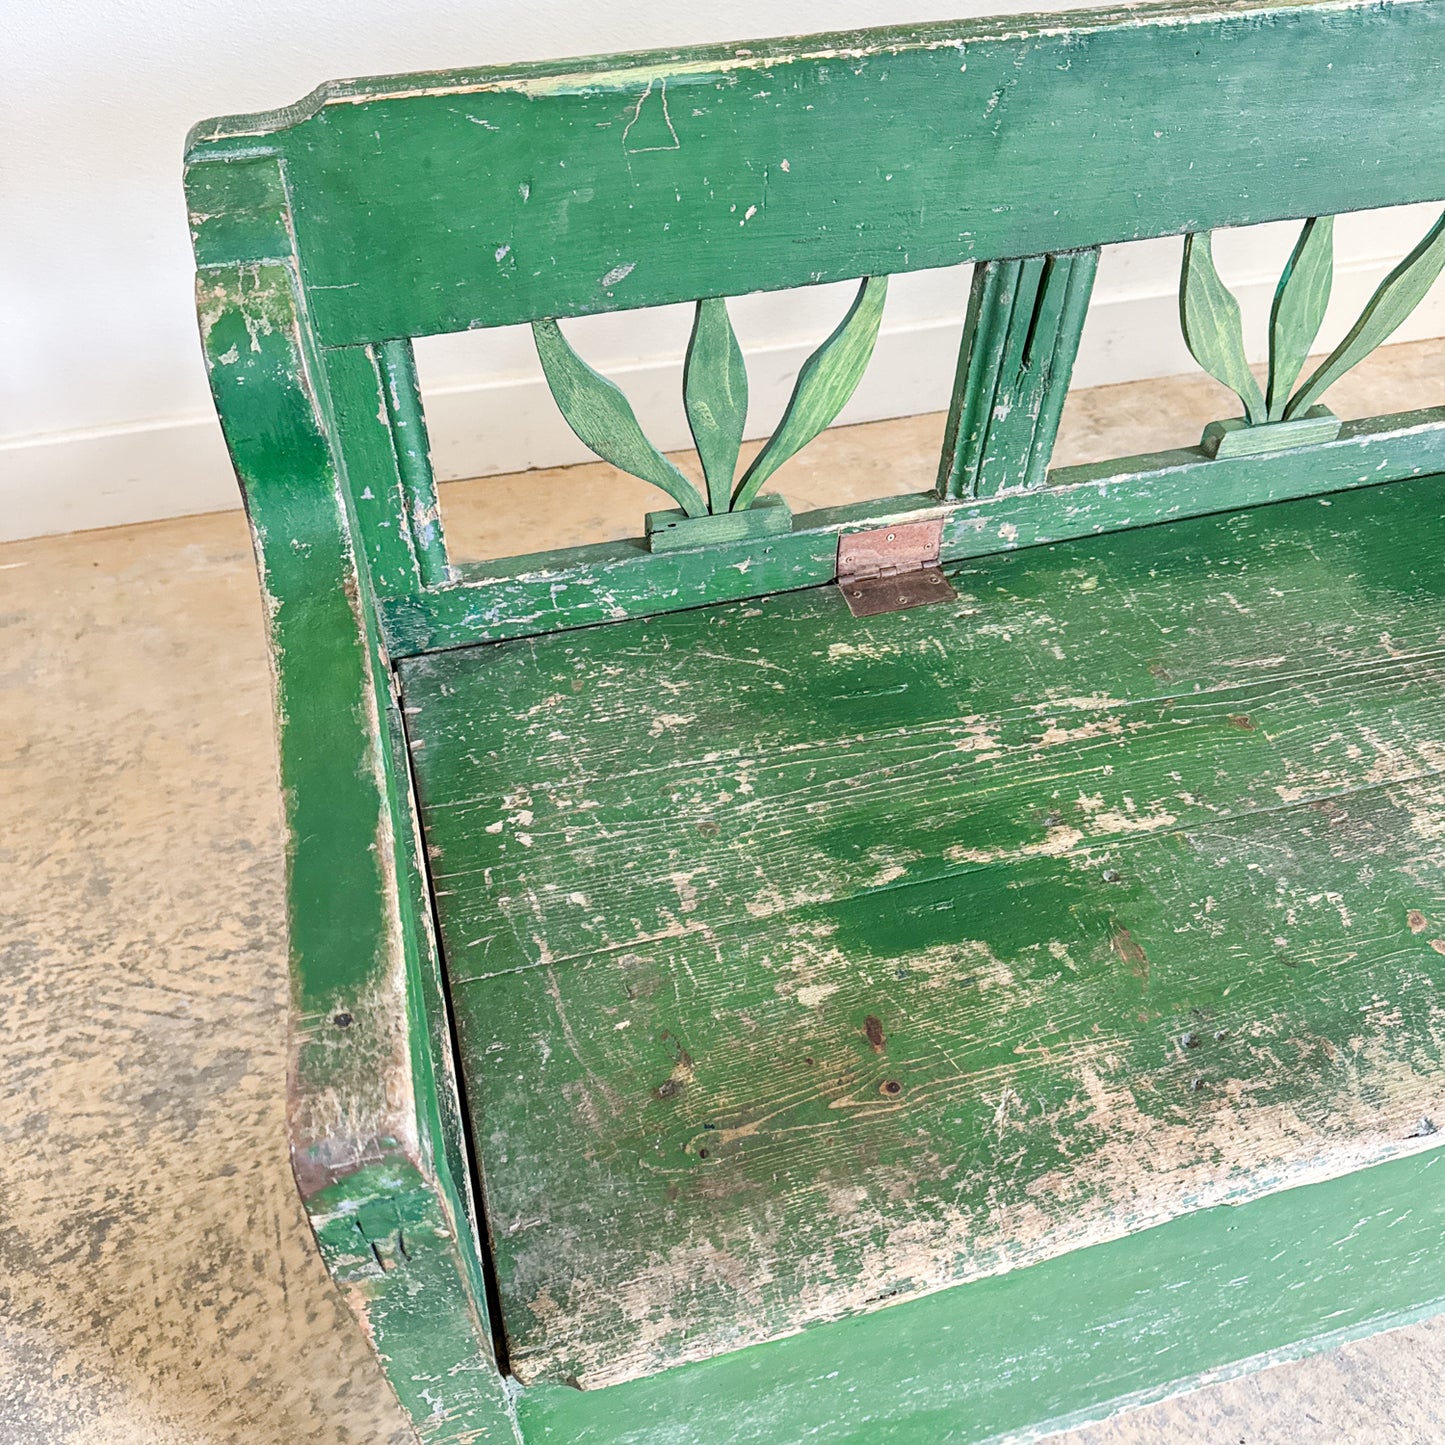 Antique Dark Green Bench with Storage and Tulip Back